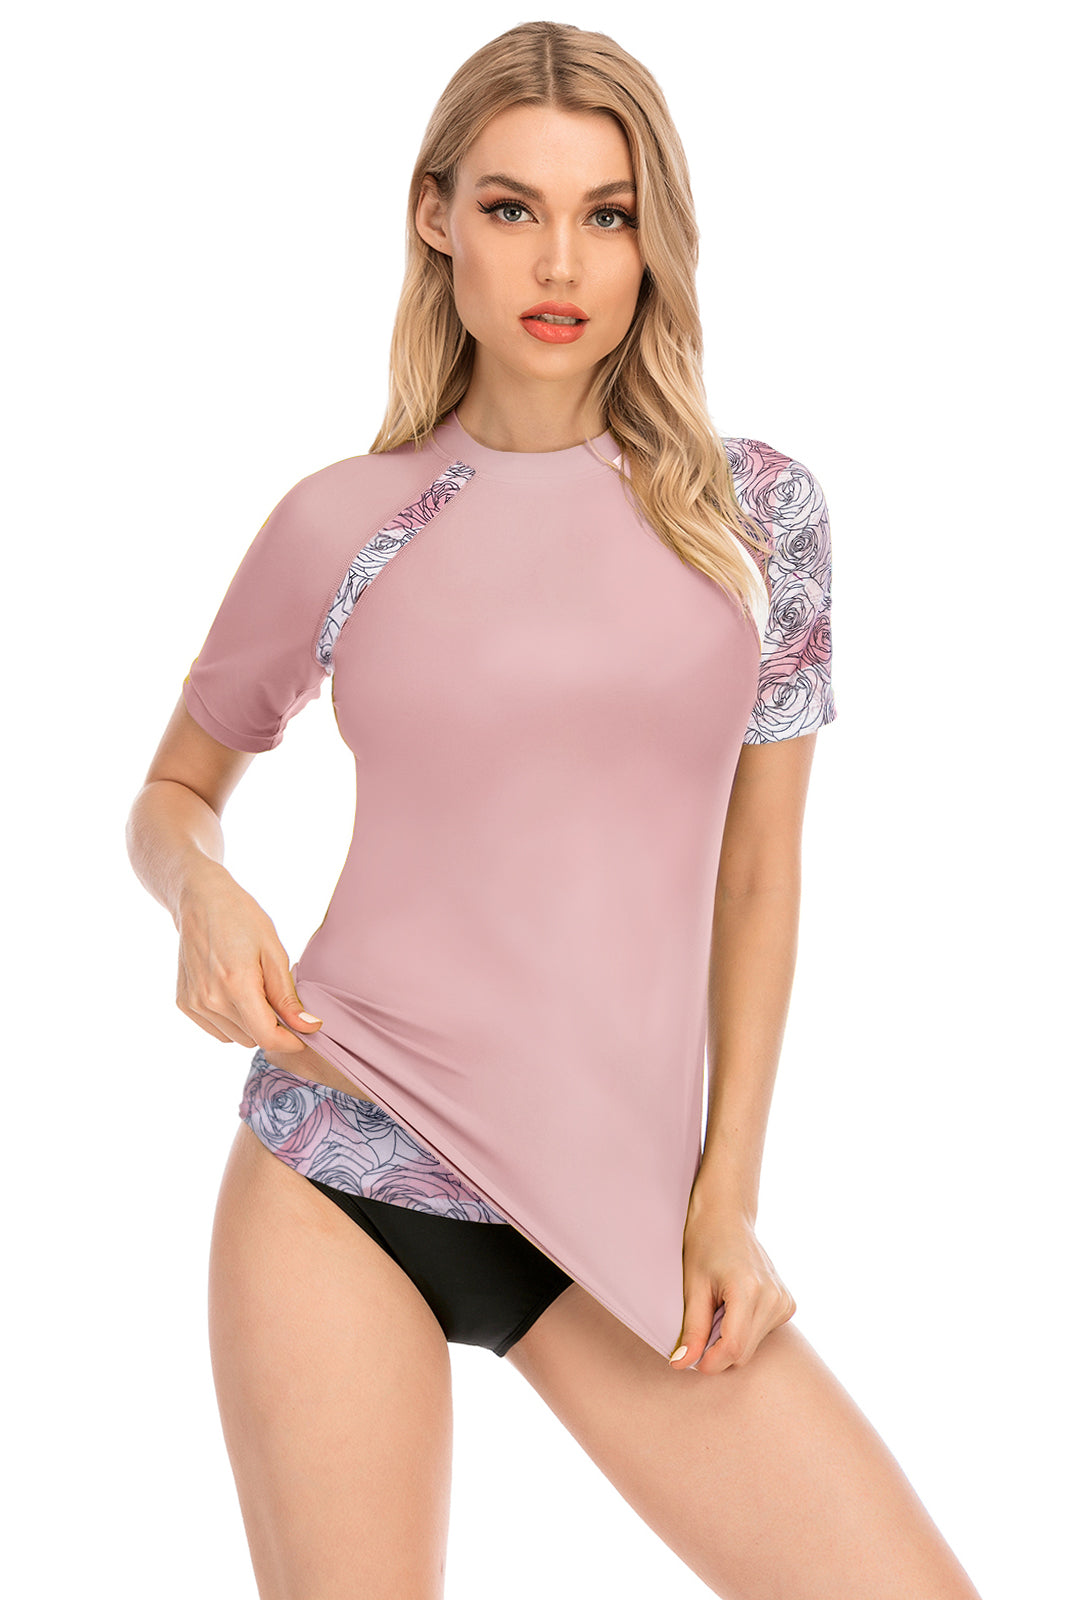 One for All Essential Short-Sleeves Rash Guard - Pink